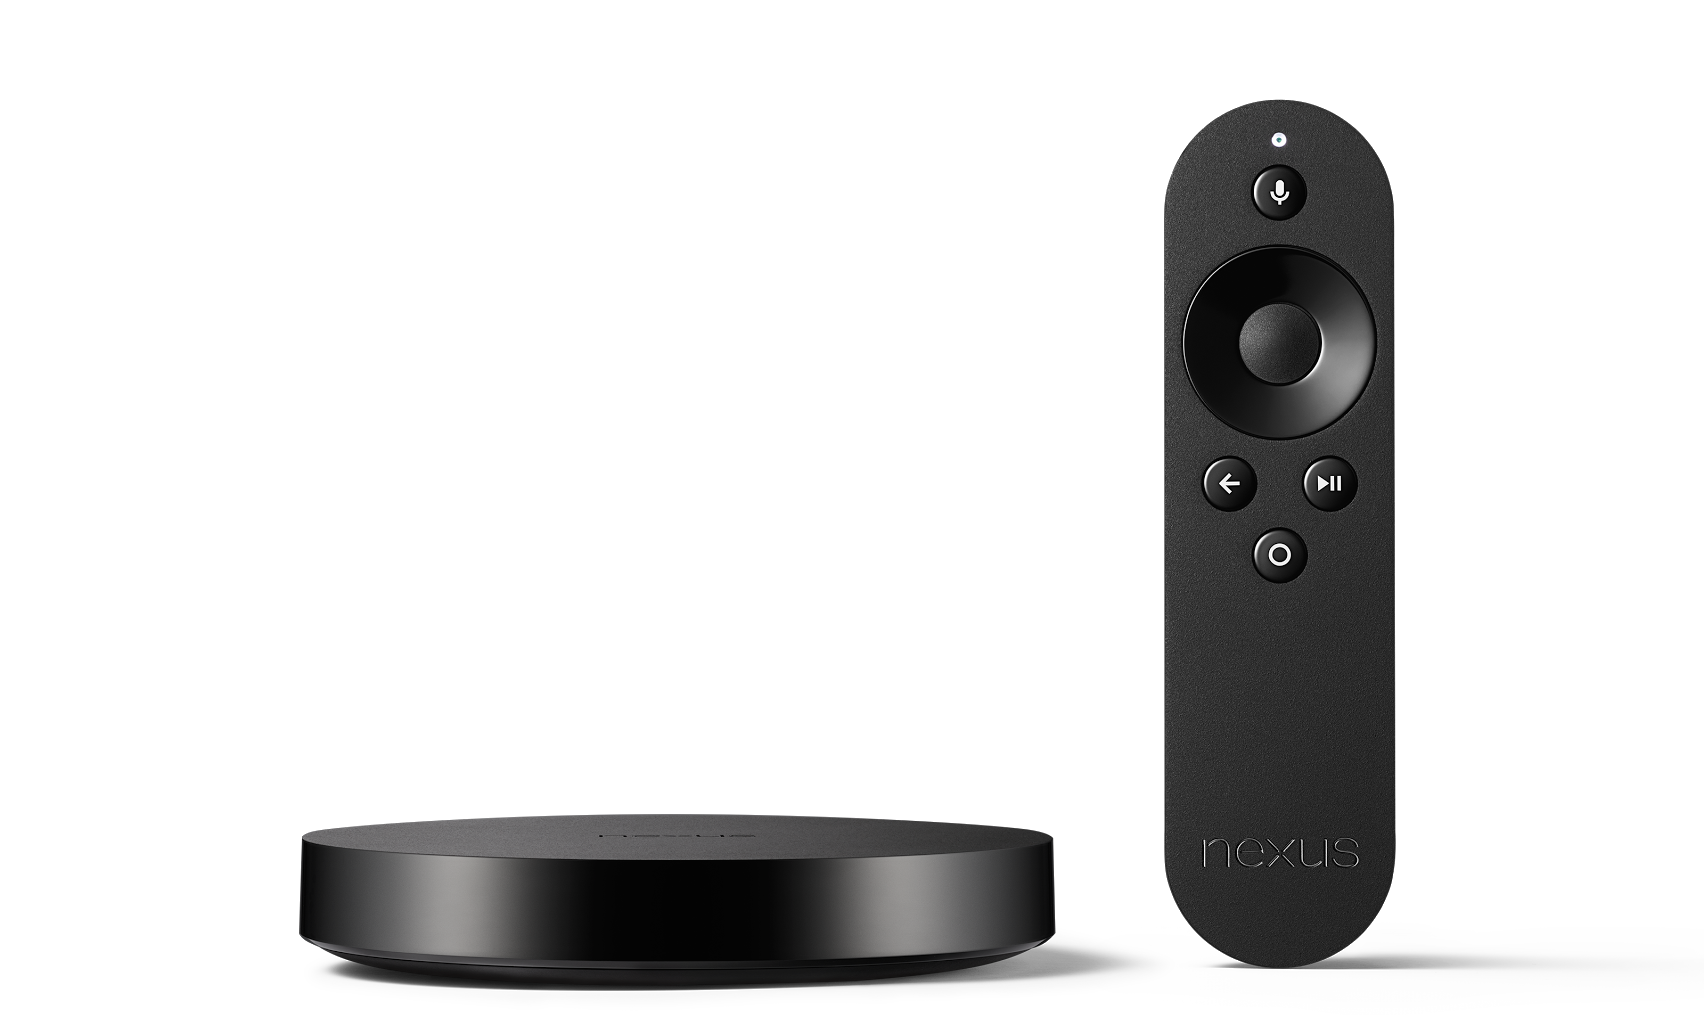 Grab a Nexus Player for only 75 with free 20 Google Play credit